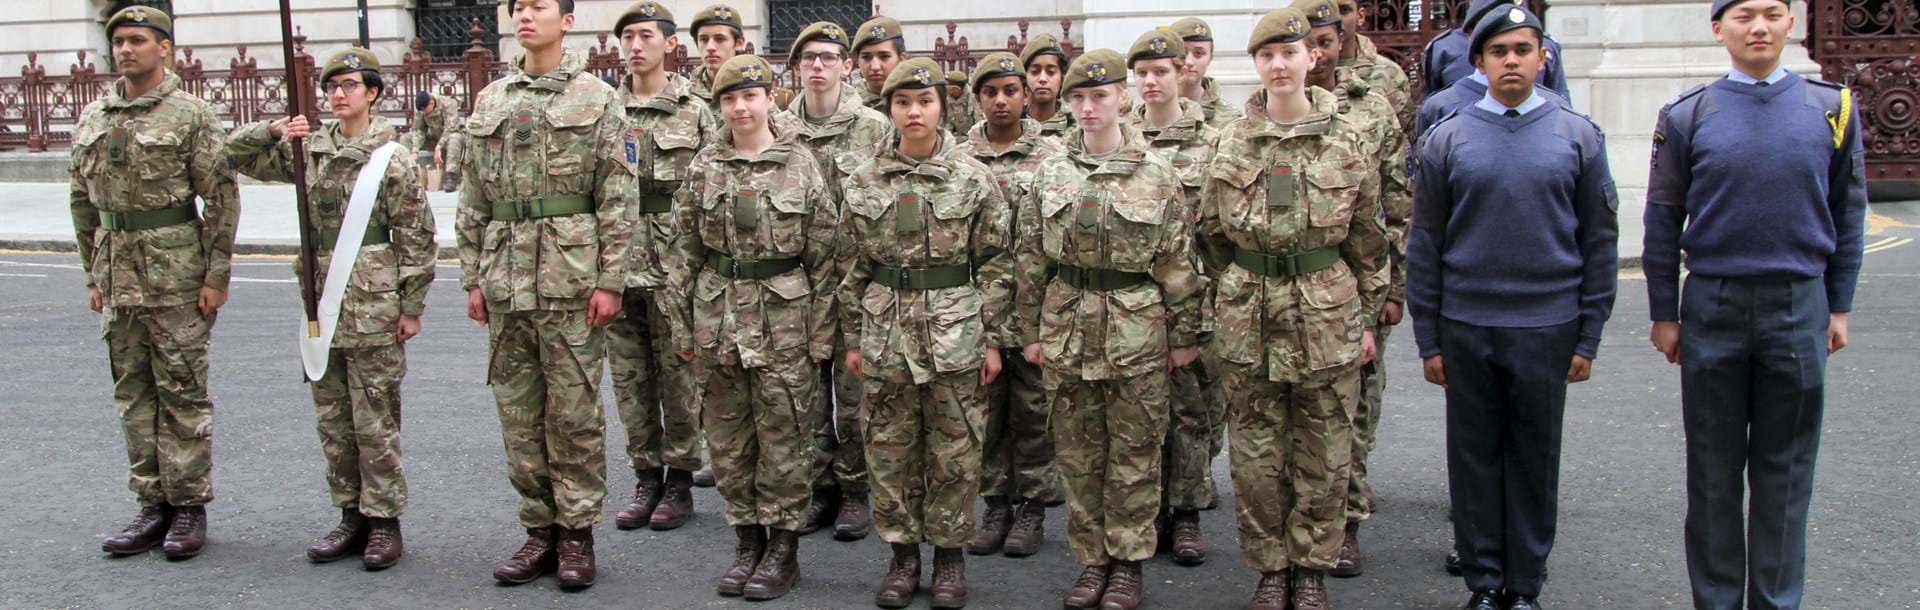 A photo of the Wilsons School CCF at the Cenotaph